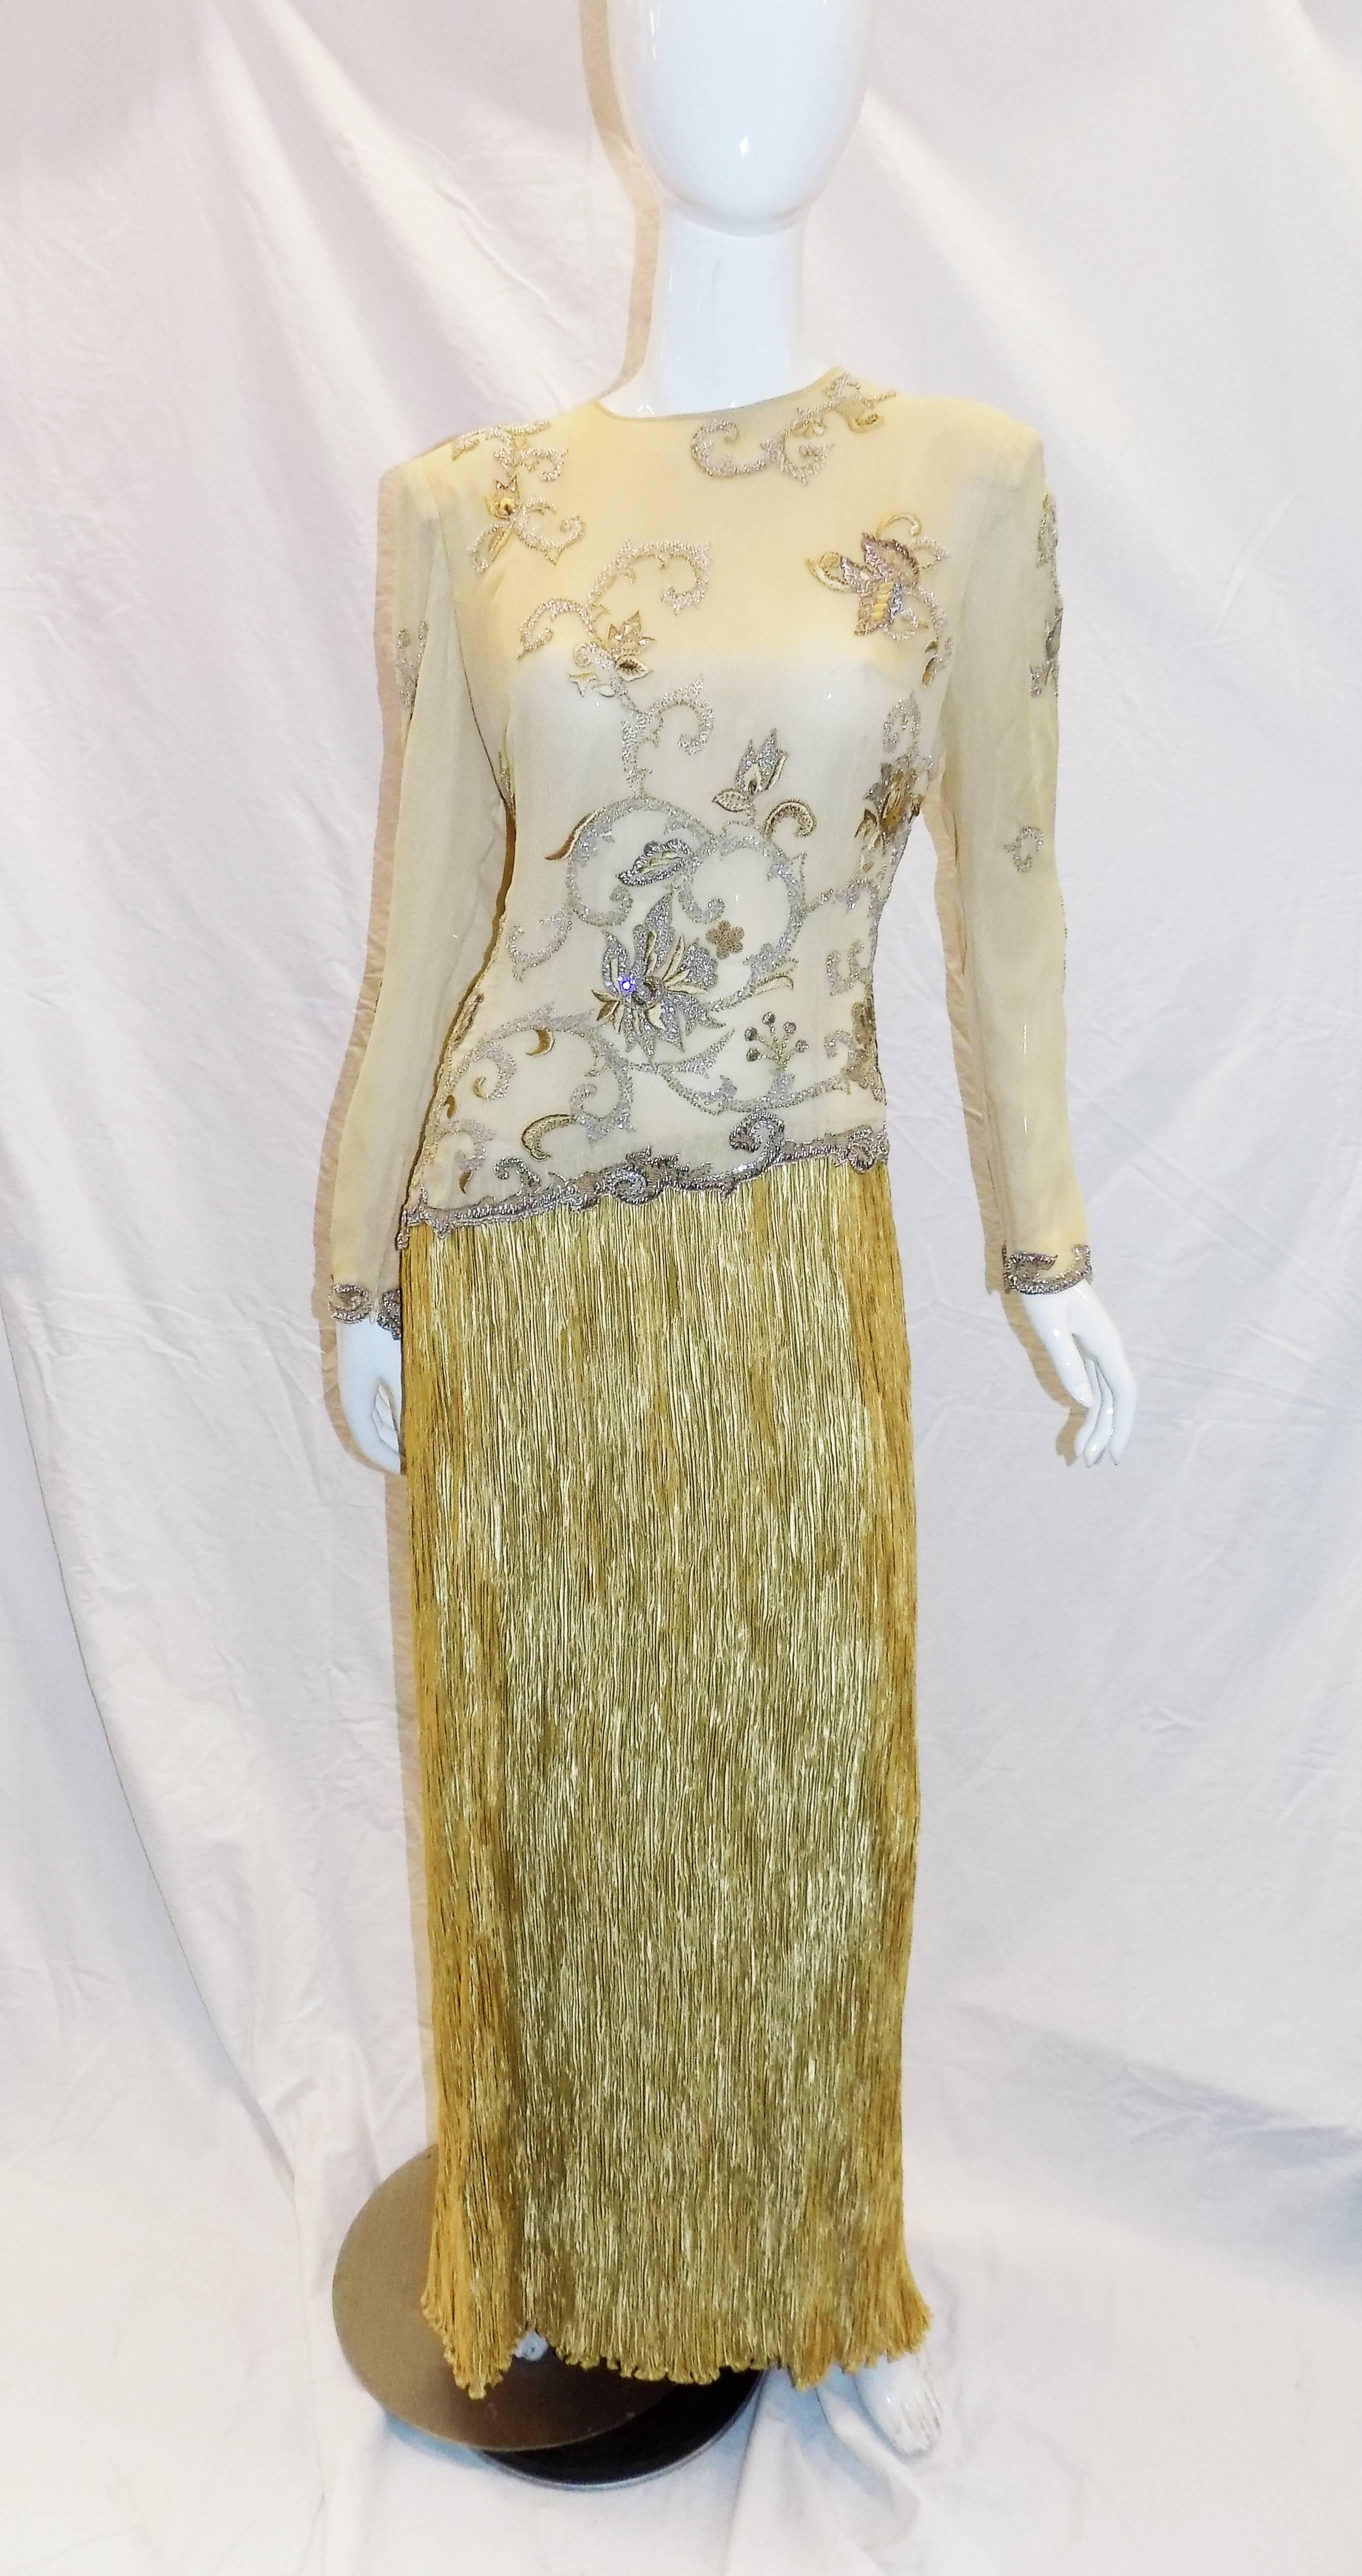 Fabulous  Mary McFadden   couture silk gown with  embroidered top ,  beading and sequins. It is  stunning 1980's Gold  evening masterpiece that takes you back to another time. The fabulous bead and sequin work throughout the gown, coupled with the